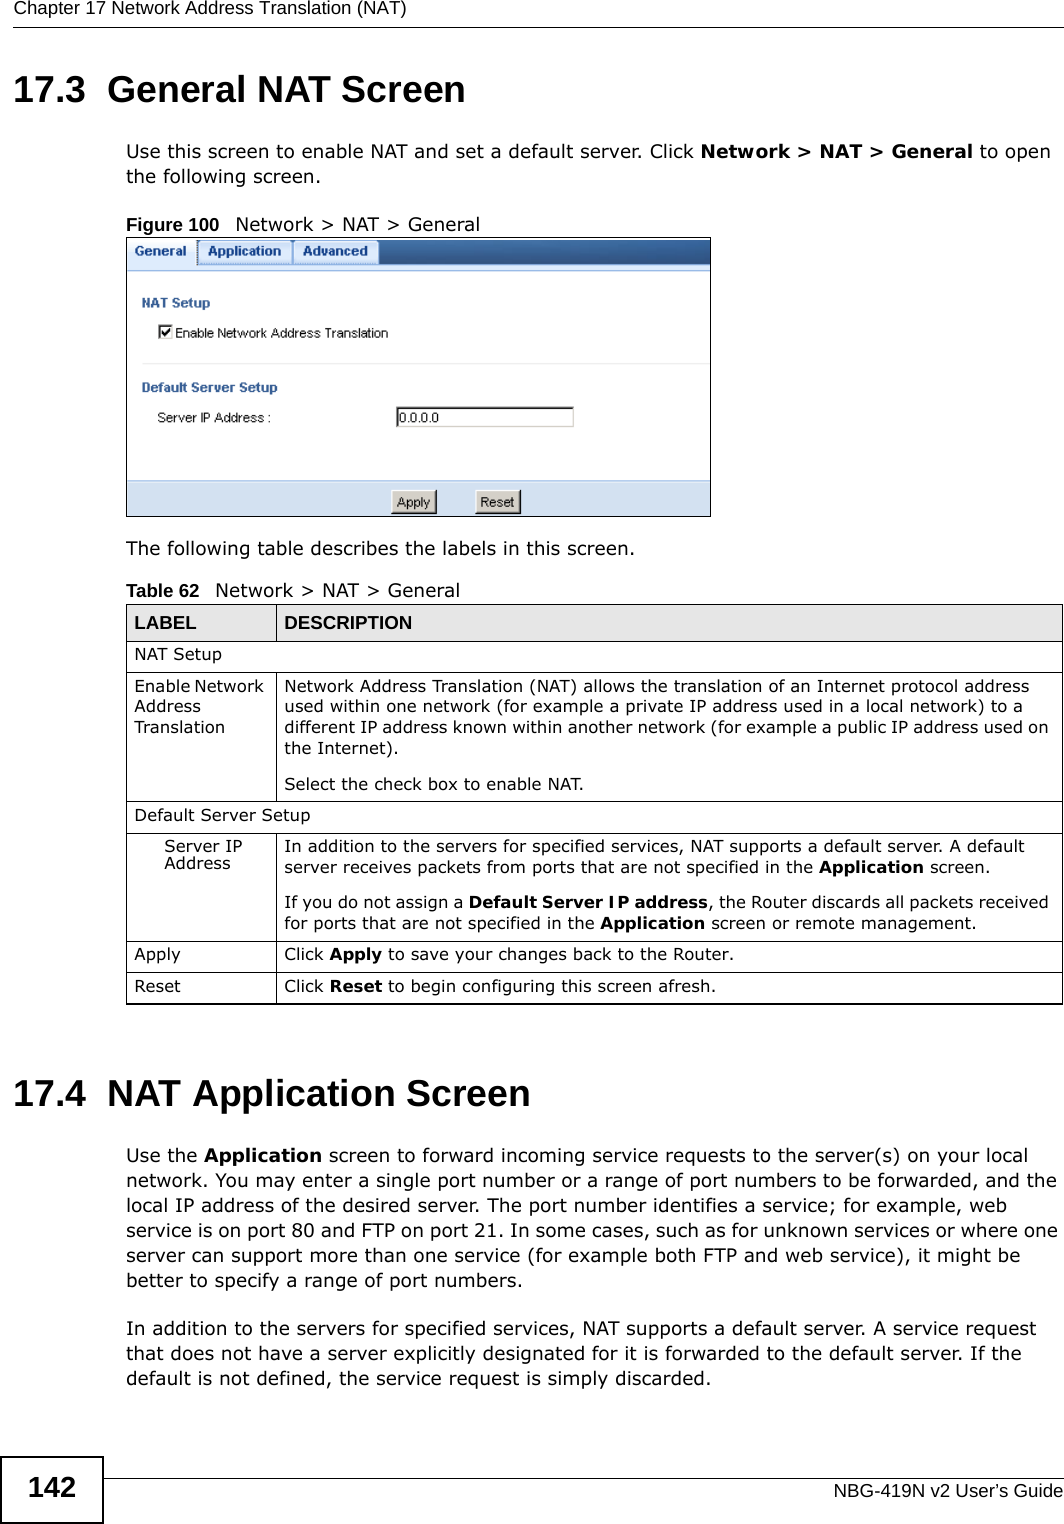 Chapter 17 Network Address Translation (NAT)NBG-419N v2 User’s Guide14217.3  General NAT ScreenUse this screen to enable NAT and set a default server. Click Network &gt; NAT &gt; General to open the following screen.Figure 100   Network &gt; NAT &gt; General The following table describes the labels in this screen.17.4  NAT Application Screen   Use the Application screen to forward incoming service requests to the server(s) on your local network. You may enter a single port number or a range of port numbers to be forwarded, and the local IP address of the desired server. The port number identifies a service; for example, web service is on port 80 and FTP on port 21. In some cases, such as for unknown services or where one server can support more than one service (for example both FTP and web service), it might be better to specify a range of port numbers.In addition to the servers for specified services, NAT supports a default server. A service request that does not have a server explicitly designated for it is forwarded to the default server. If the default is not defined, the service request is simply discarded.Table 62   Network &gt; NAT &gt; GeneralLABEL DESCRIPTIONNAT SetupEnable Network Address TranslationNetwork Address Translation (NAT) allows the translation of an Internet protocol address used within one network (for example a private IP address used in a local network) to a different IP address known within another network (for example a public IP address used on the Internet). Select the check box to enable NAT.Default Server SetupServer IP Address In addition to the servers for specified services, NAT supports a default server. A default server receives packets from ports that are not specified in the Application screen. If you do not assign a Default Server IP address, the Router discards all packets received for ports that are not specified in the Application screen or remote management.Apply Click Apply to save your changes back to the Router.Reset Click Reset to begin configuring this screen afresh.